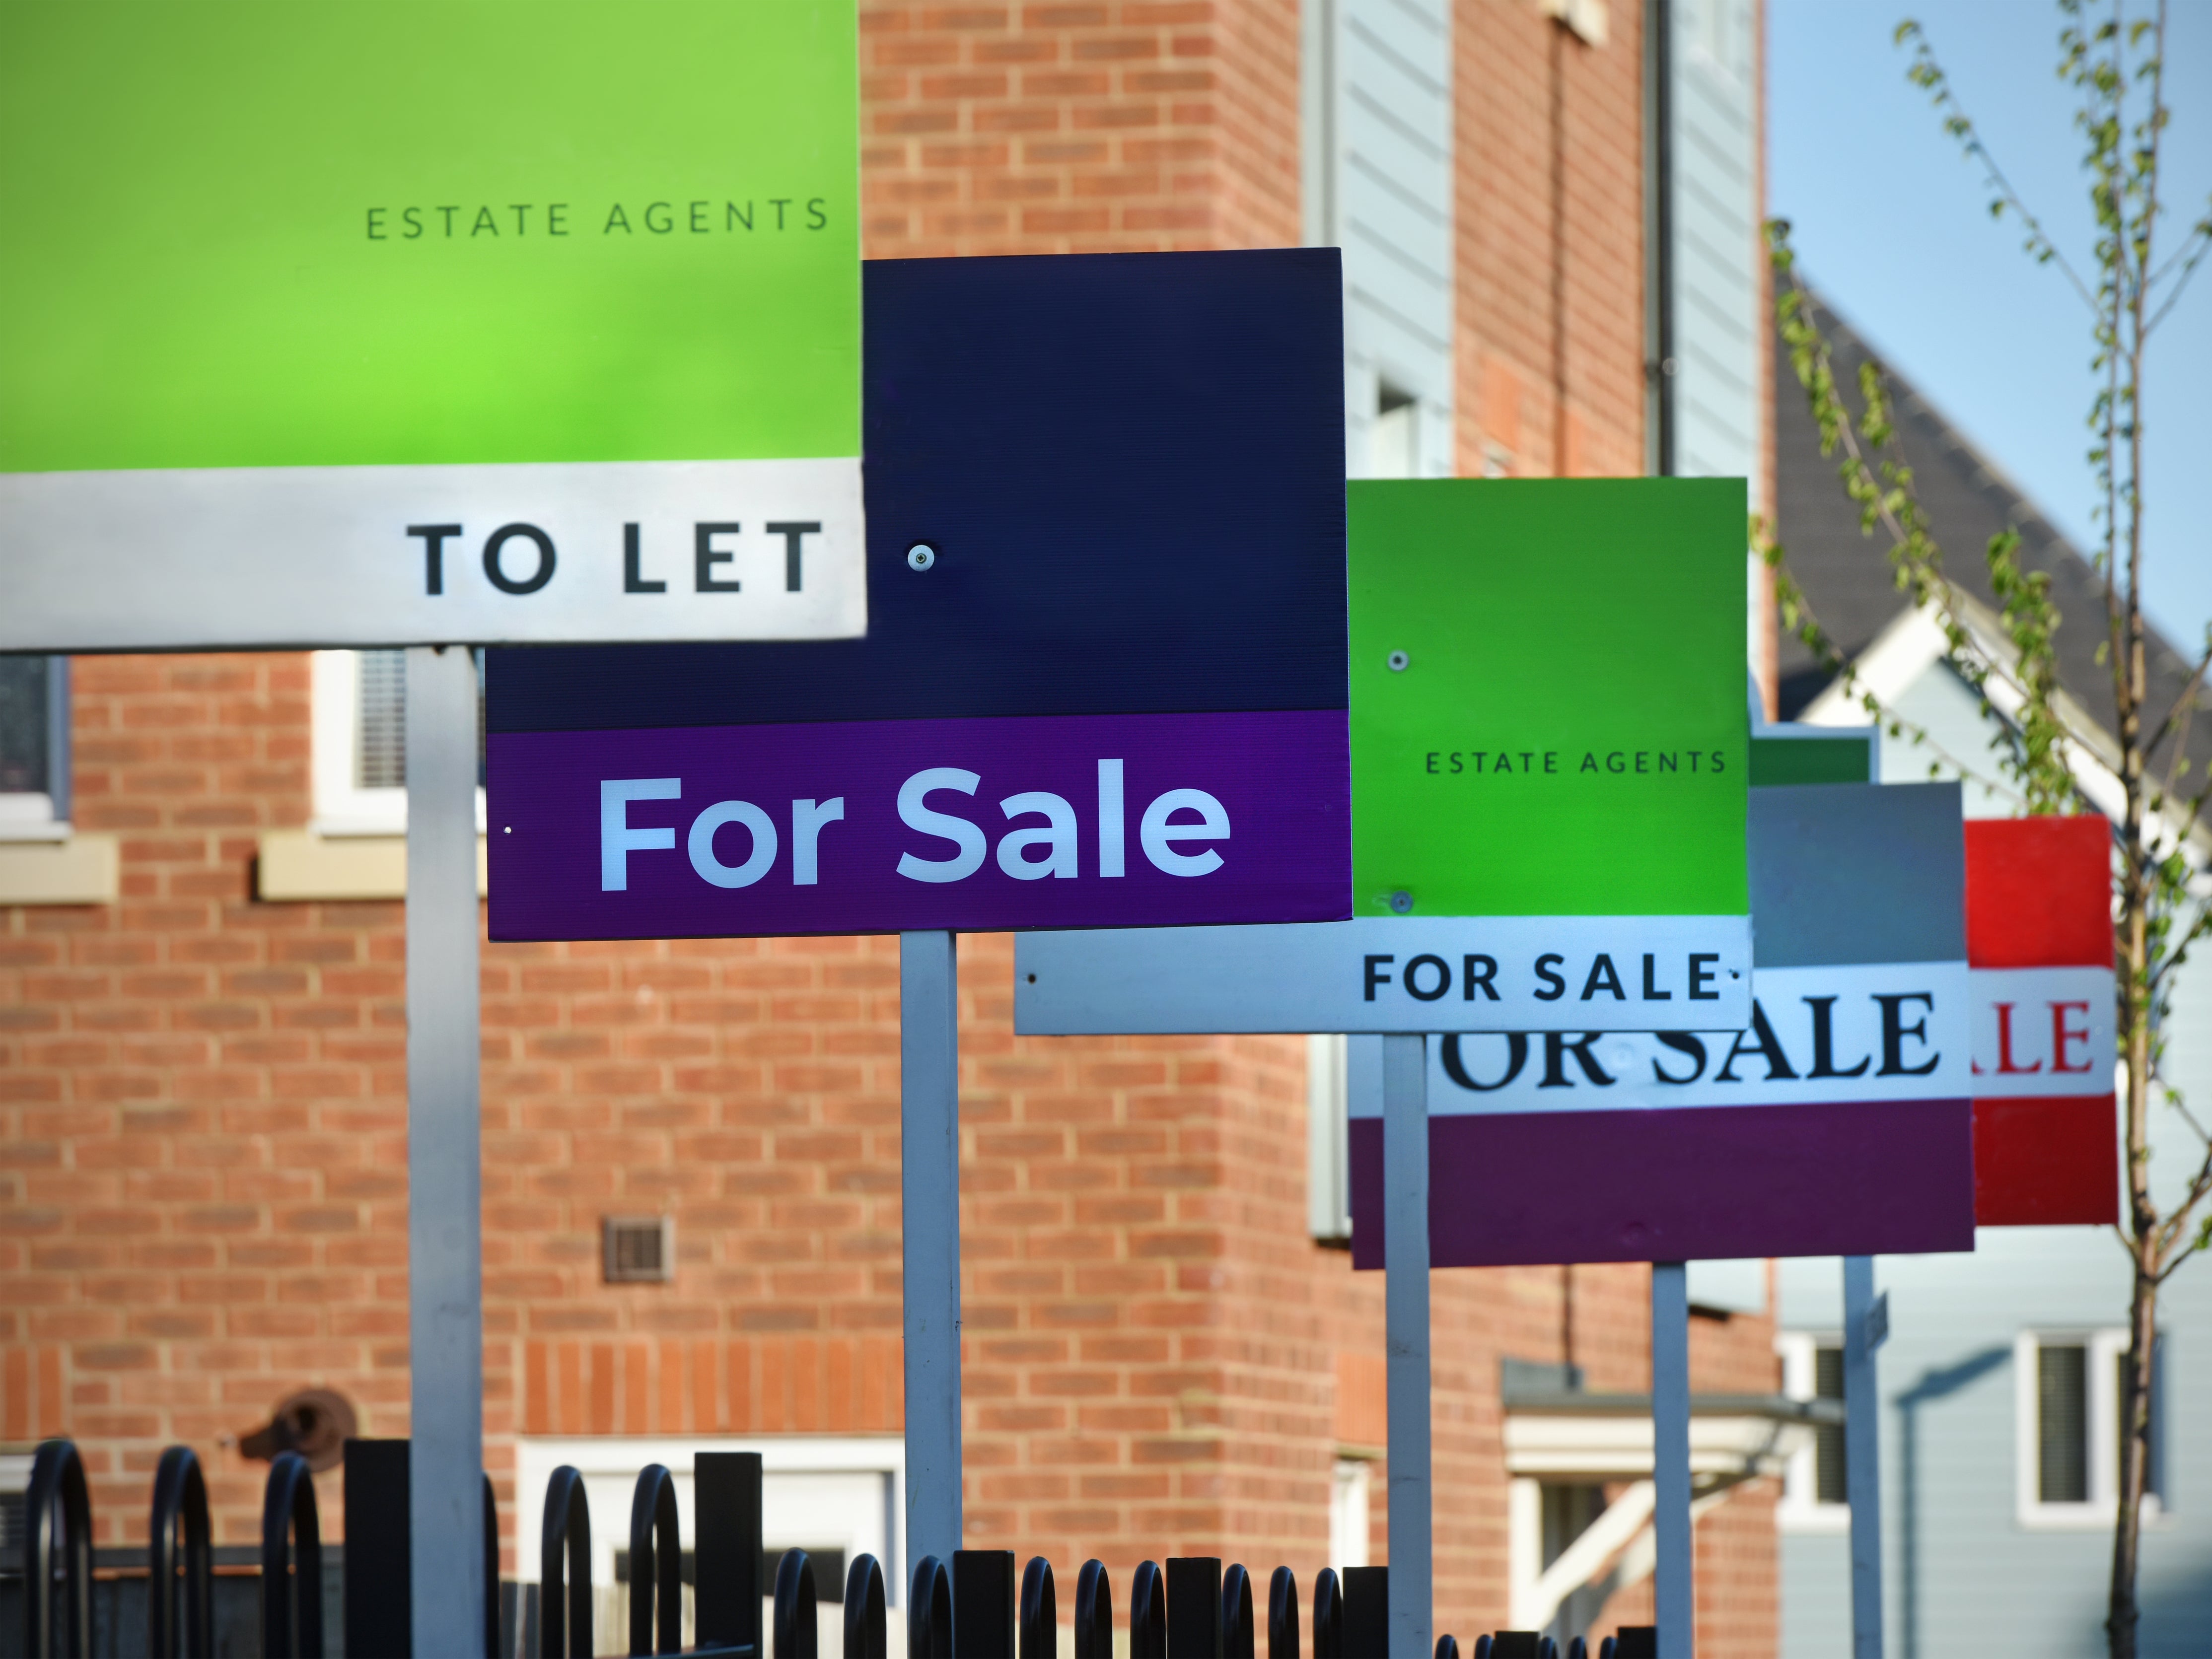 Generation rent is in for more hard times as the market turns across Britain